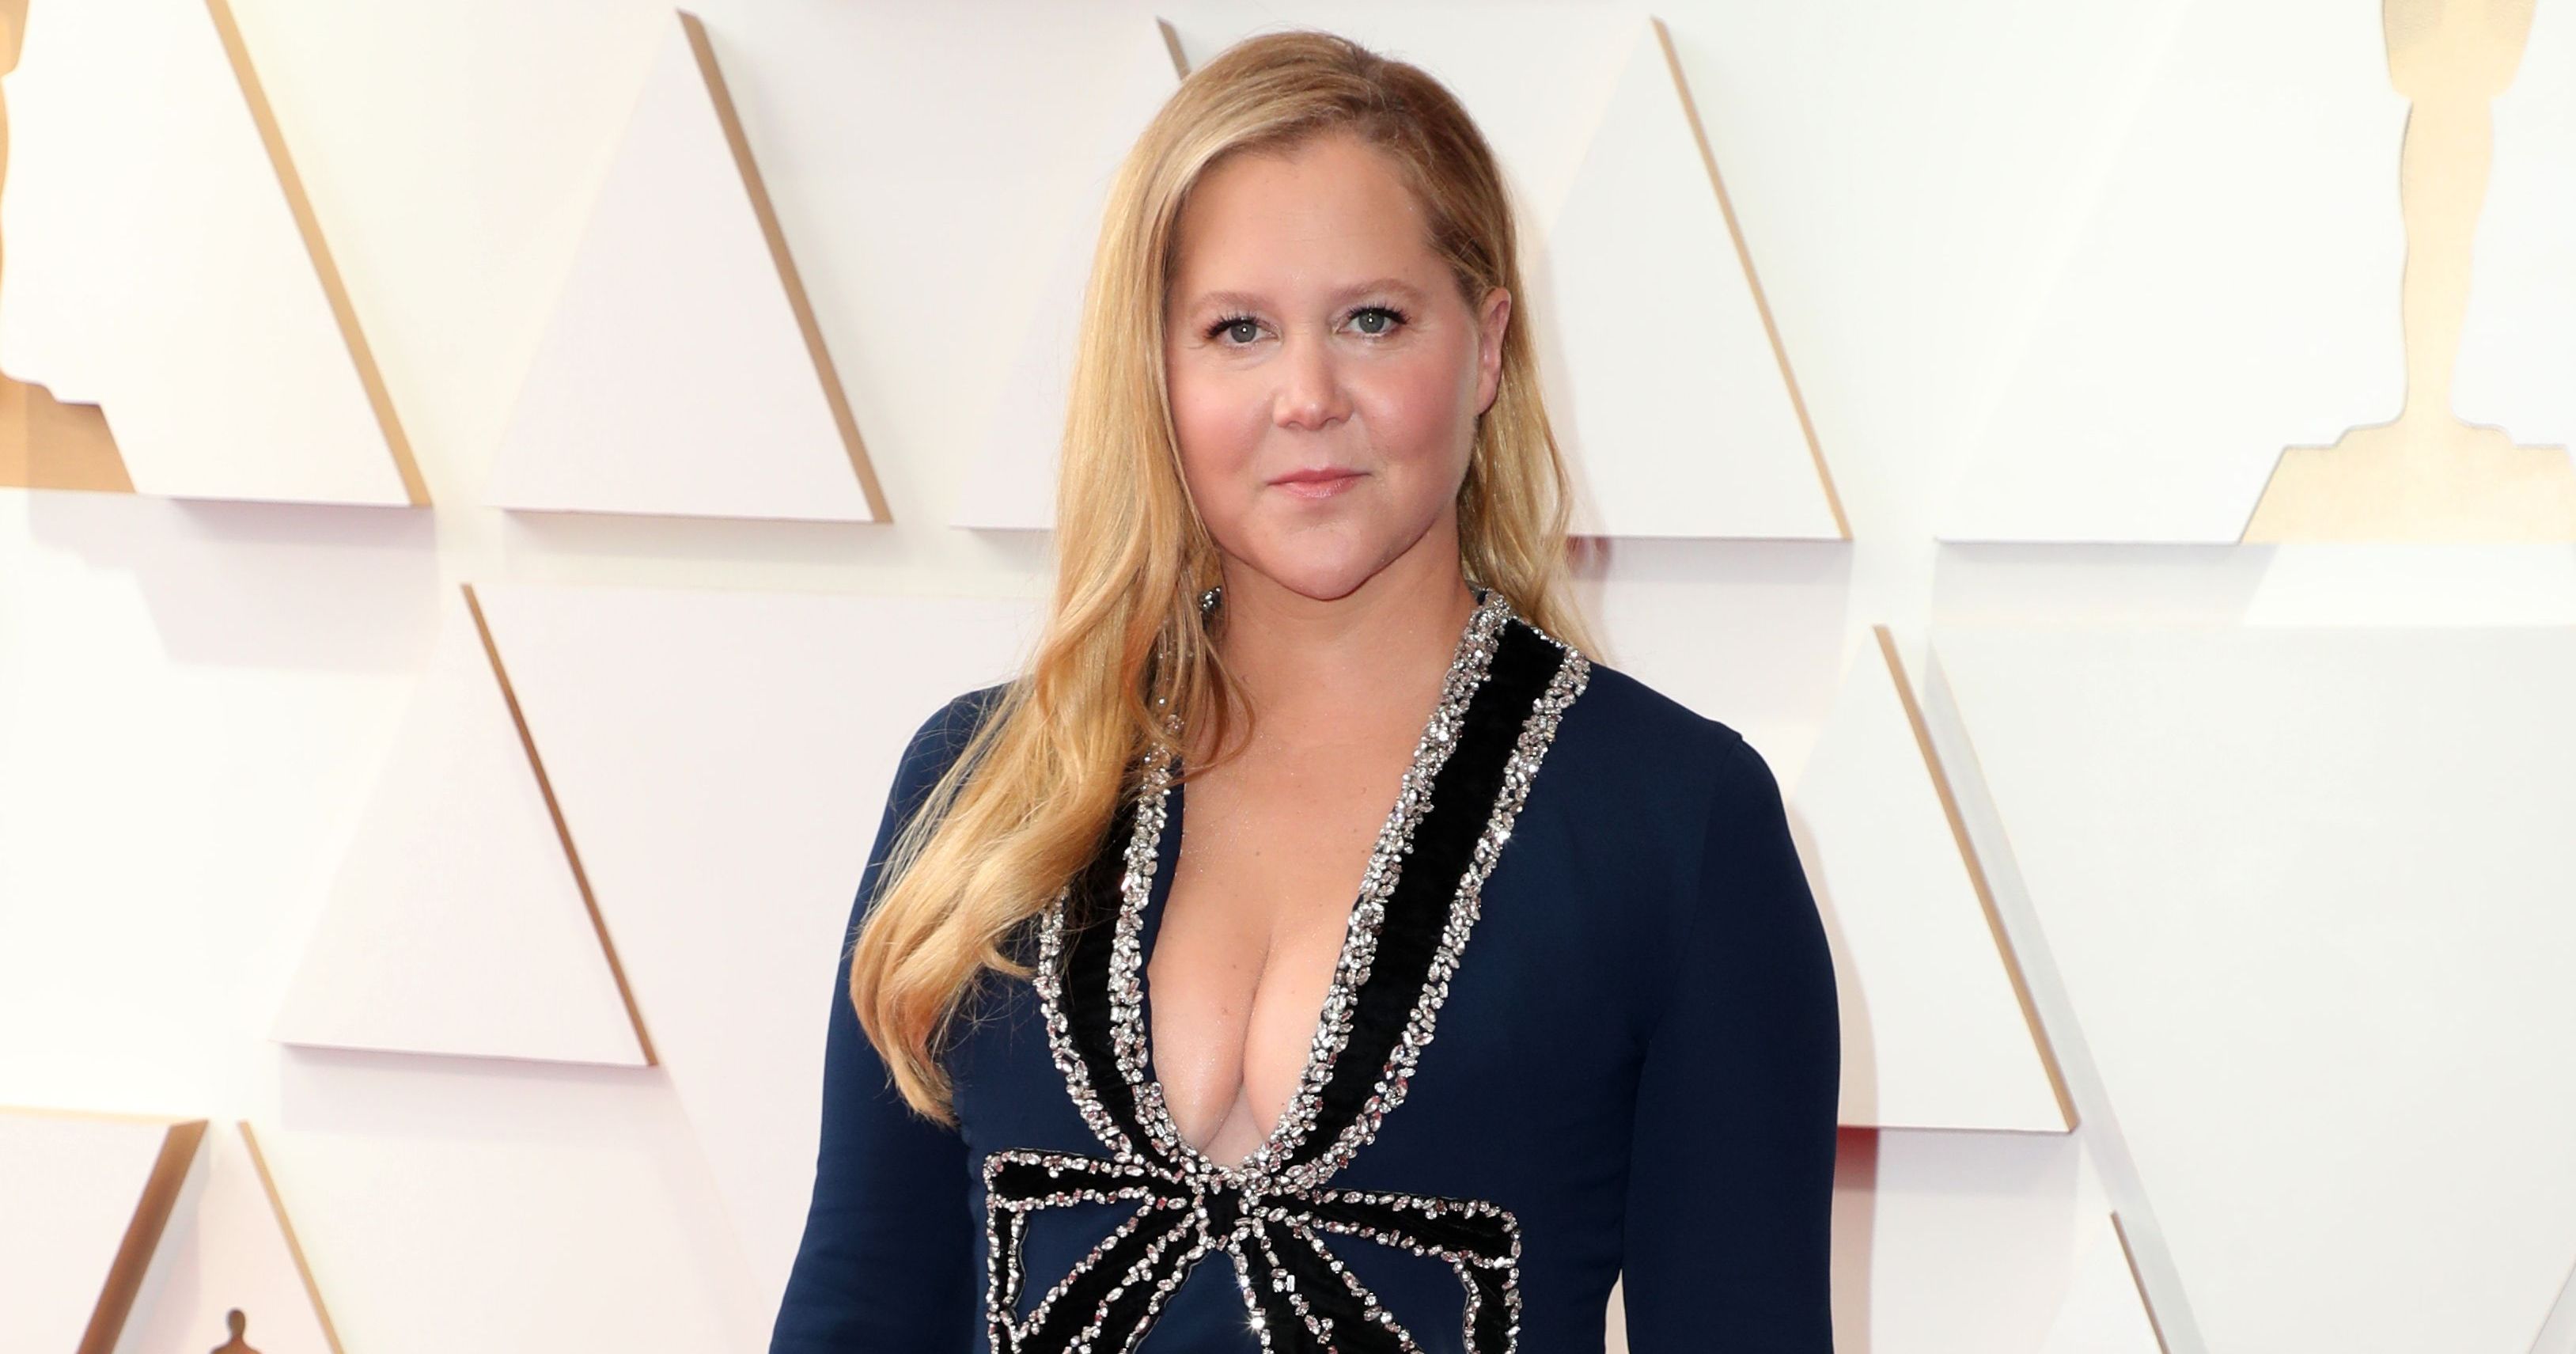 cindy lee fryer share amy schumer boob uncensored photos